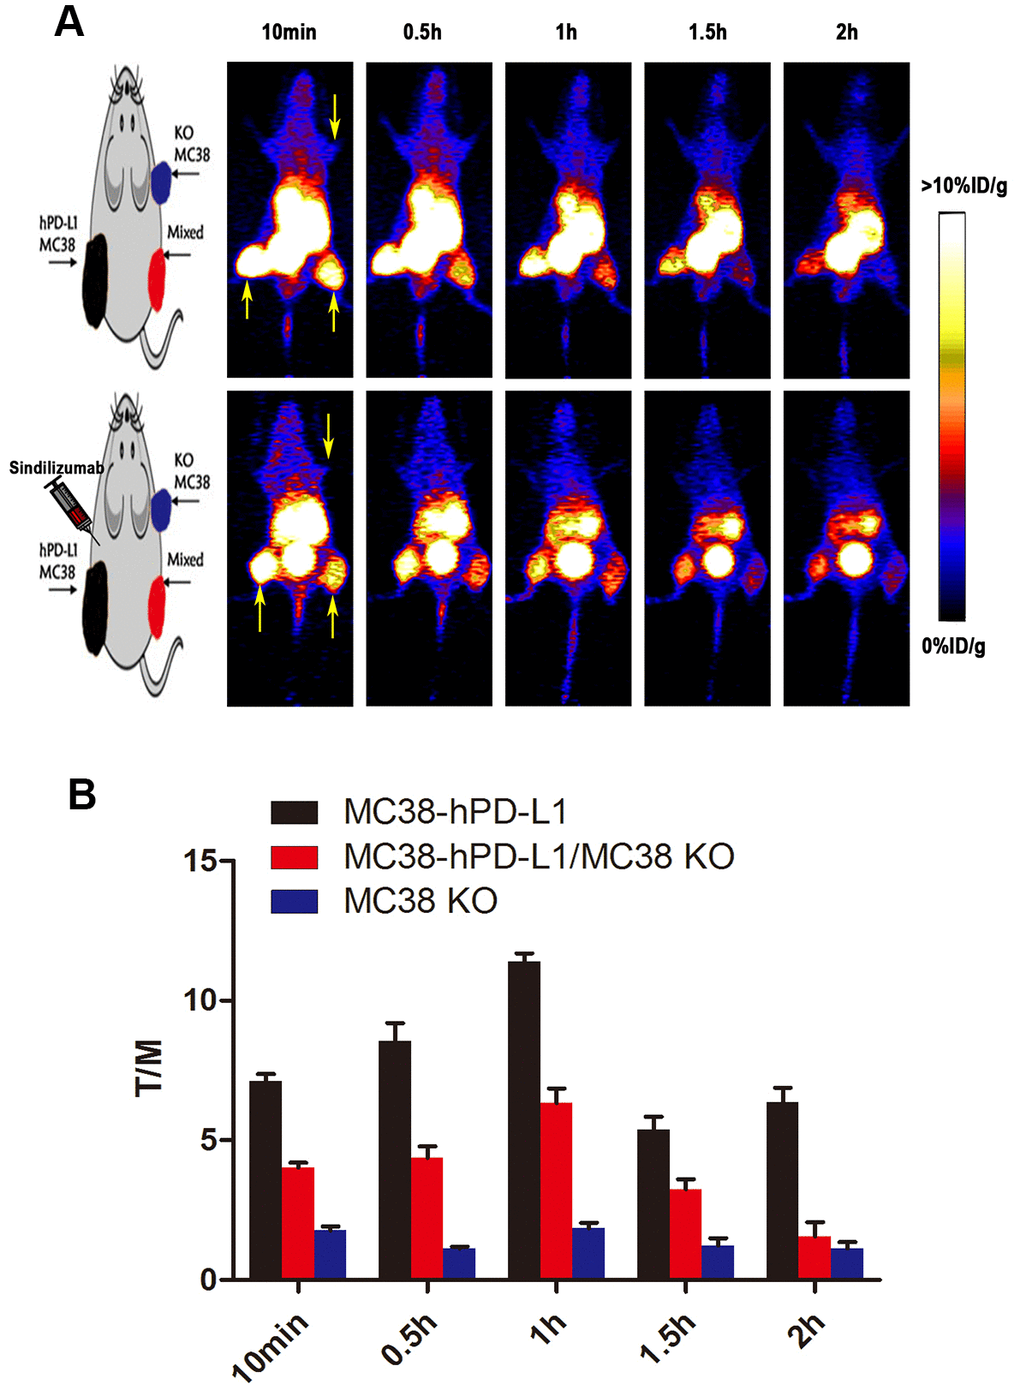 PET imaging studies of 68Ga-NOTA-Nb109. (A) Dynamic PET scanning of MC38 tumor–bearing models (with or without injection of Sindilizumab) over 0–2 h after injection of 4.0–5.0 MBq of 68Ga-NOTA-Nb109. (n=3, tumors indicated by the yellow arrow). (B) Tumor-to-muscle (T/M) ratio of 68Ga-NOTA-Nb109 was analyzed according to the quantification analysis of PET images.